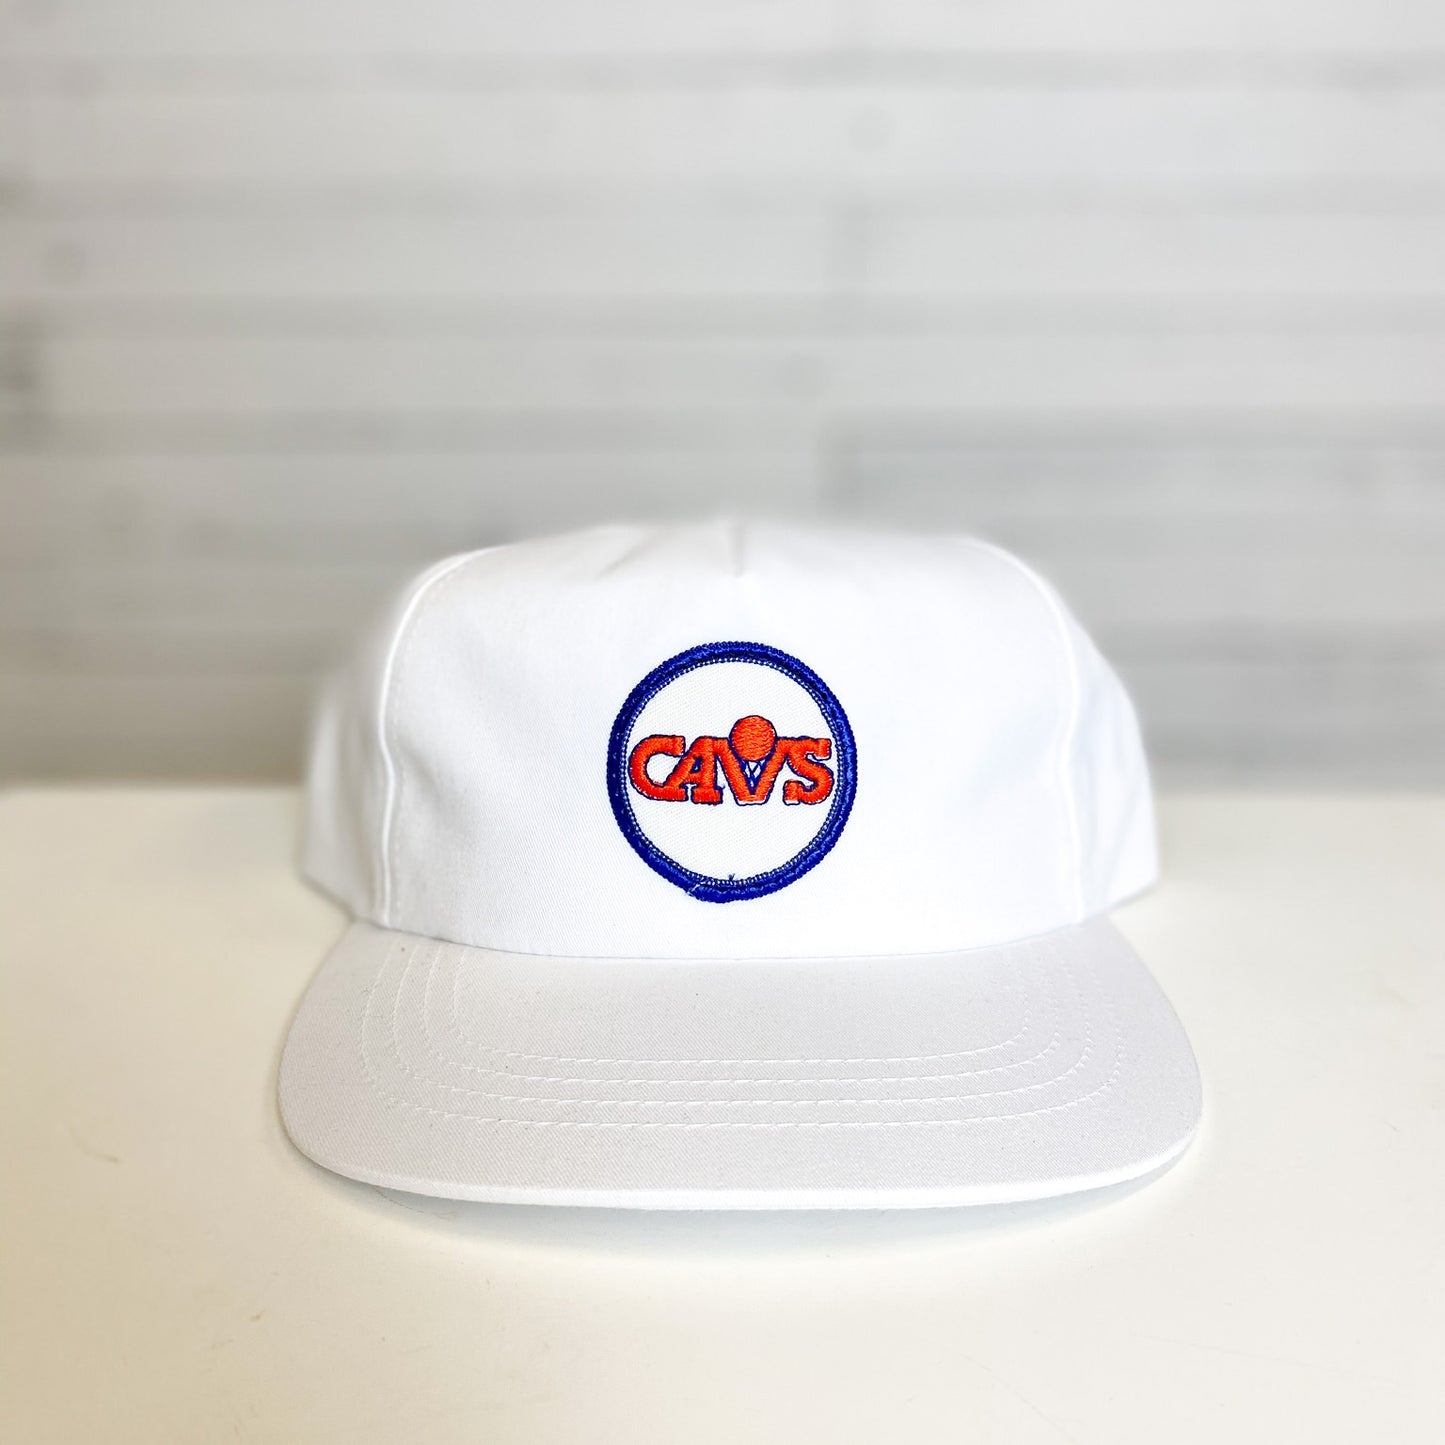 The Mark Price Special Vintage Hat